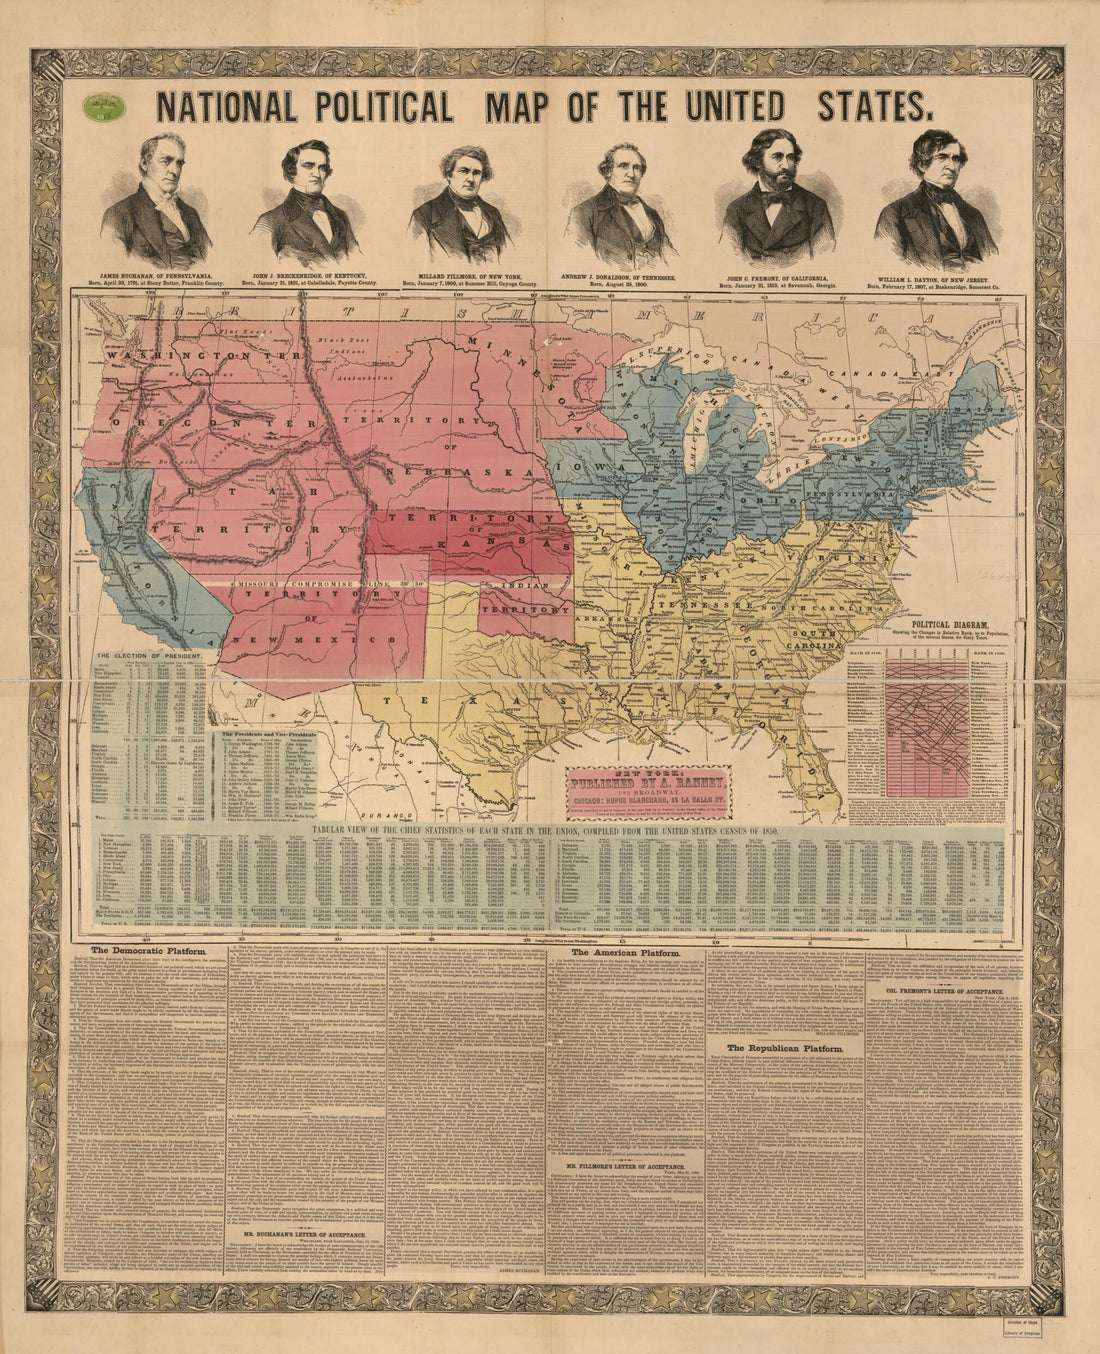 This old map of National Political Map of the United States from 1856 was created by Rufus Blanchard, Adolphus Ranney in 1856